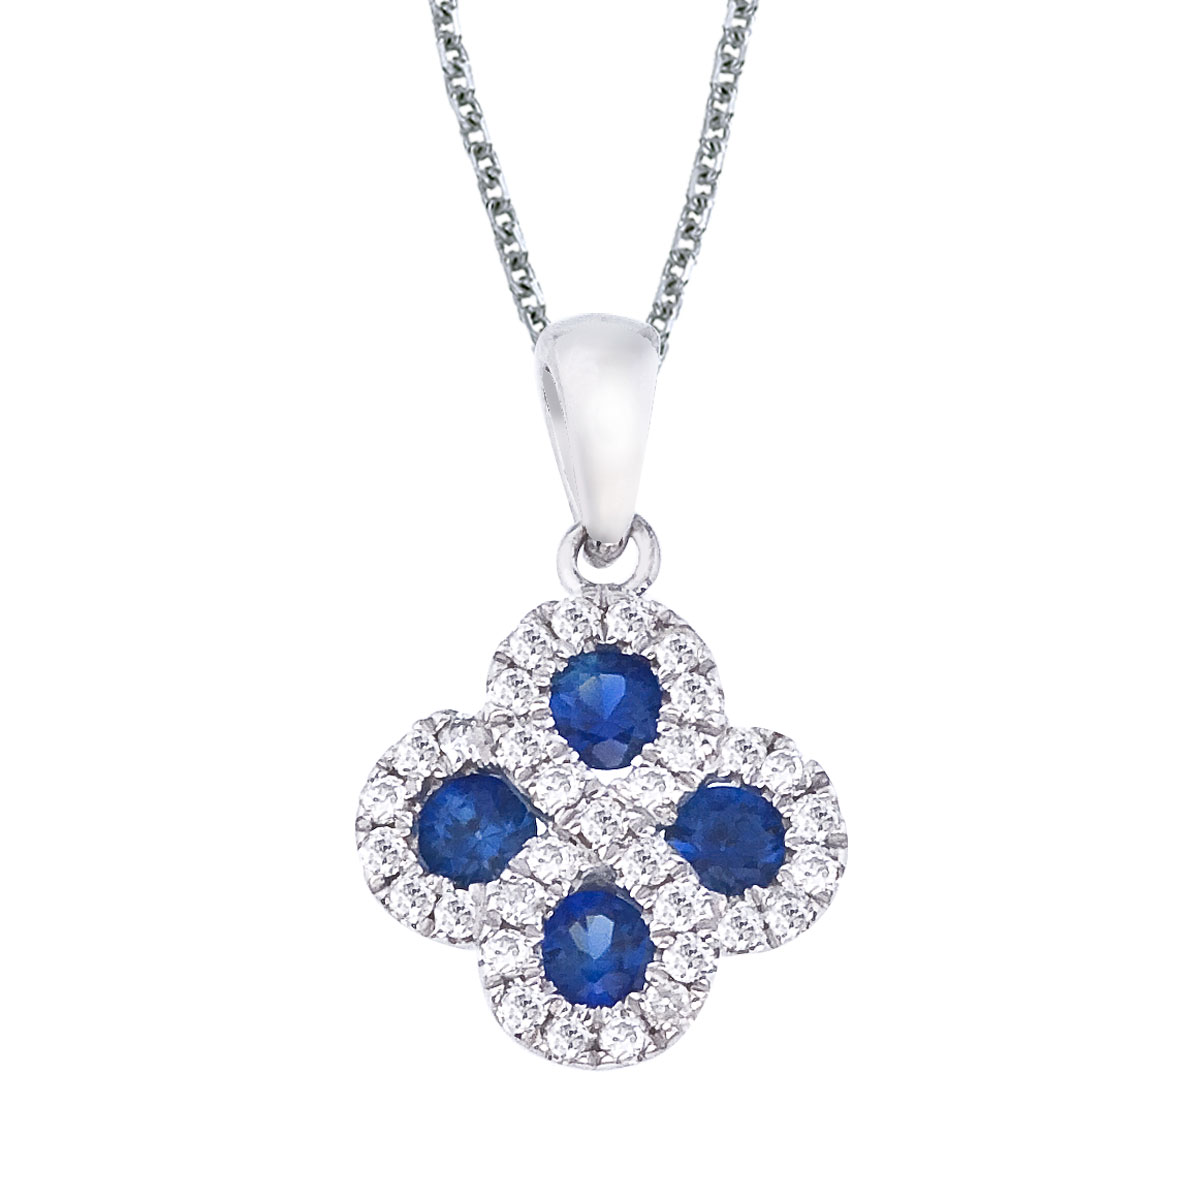 JCX2565: This 14k white gold clover shape pendant contains four 2.7 mm sapphires surrounded by .13 carats of shimmering diamonds.